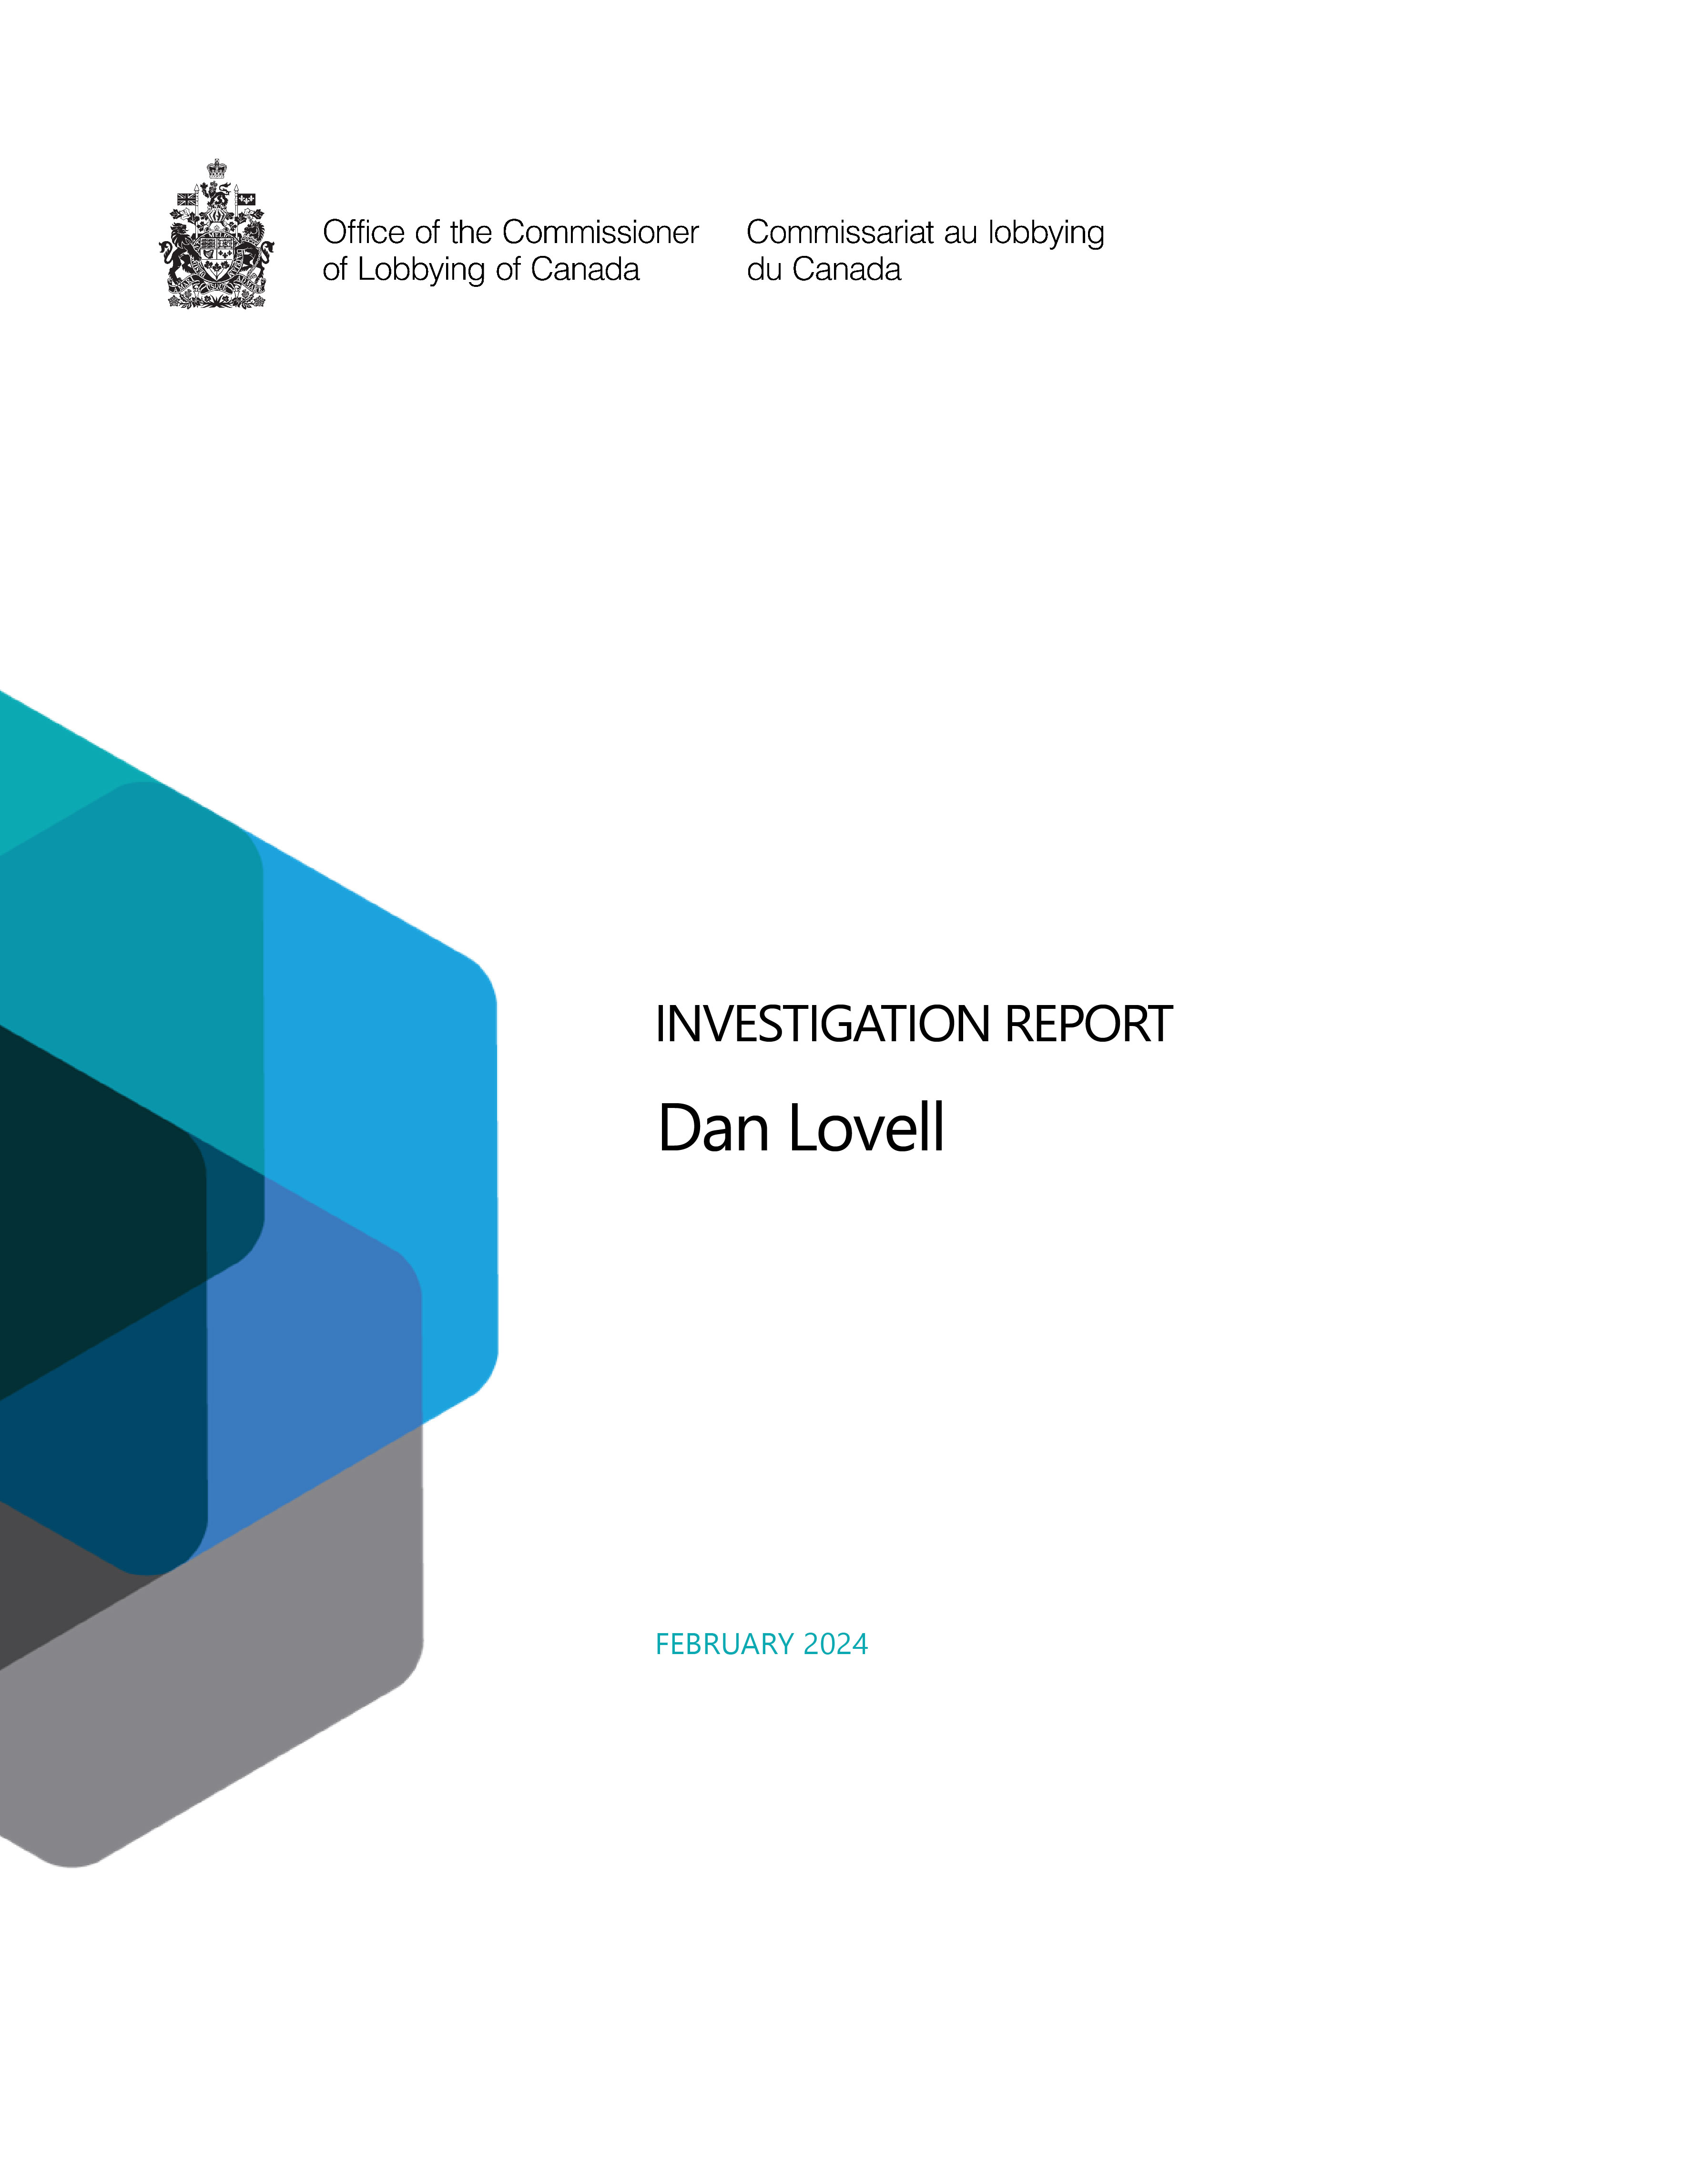 Cover of the investigation report on Dan Lovell